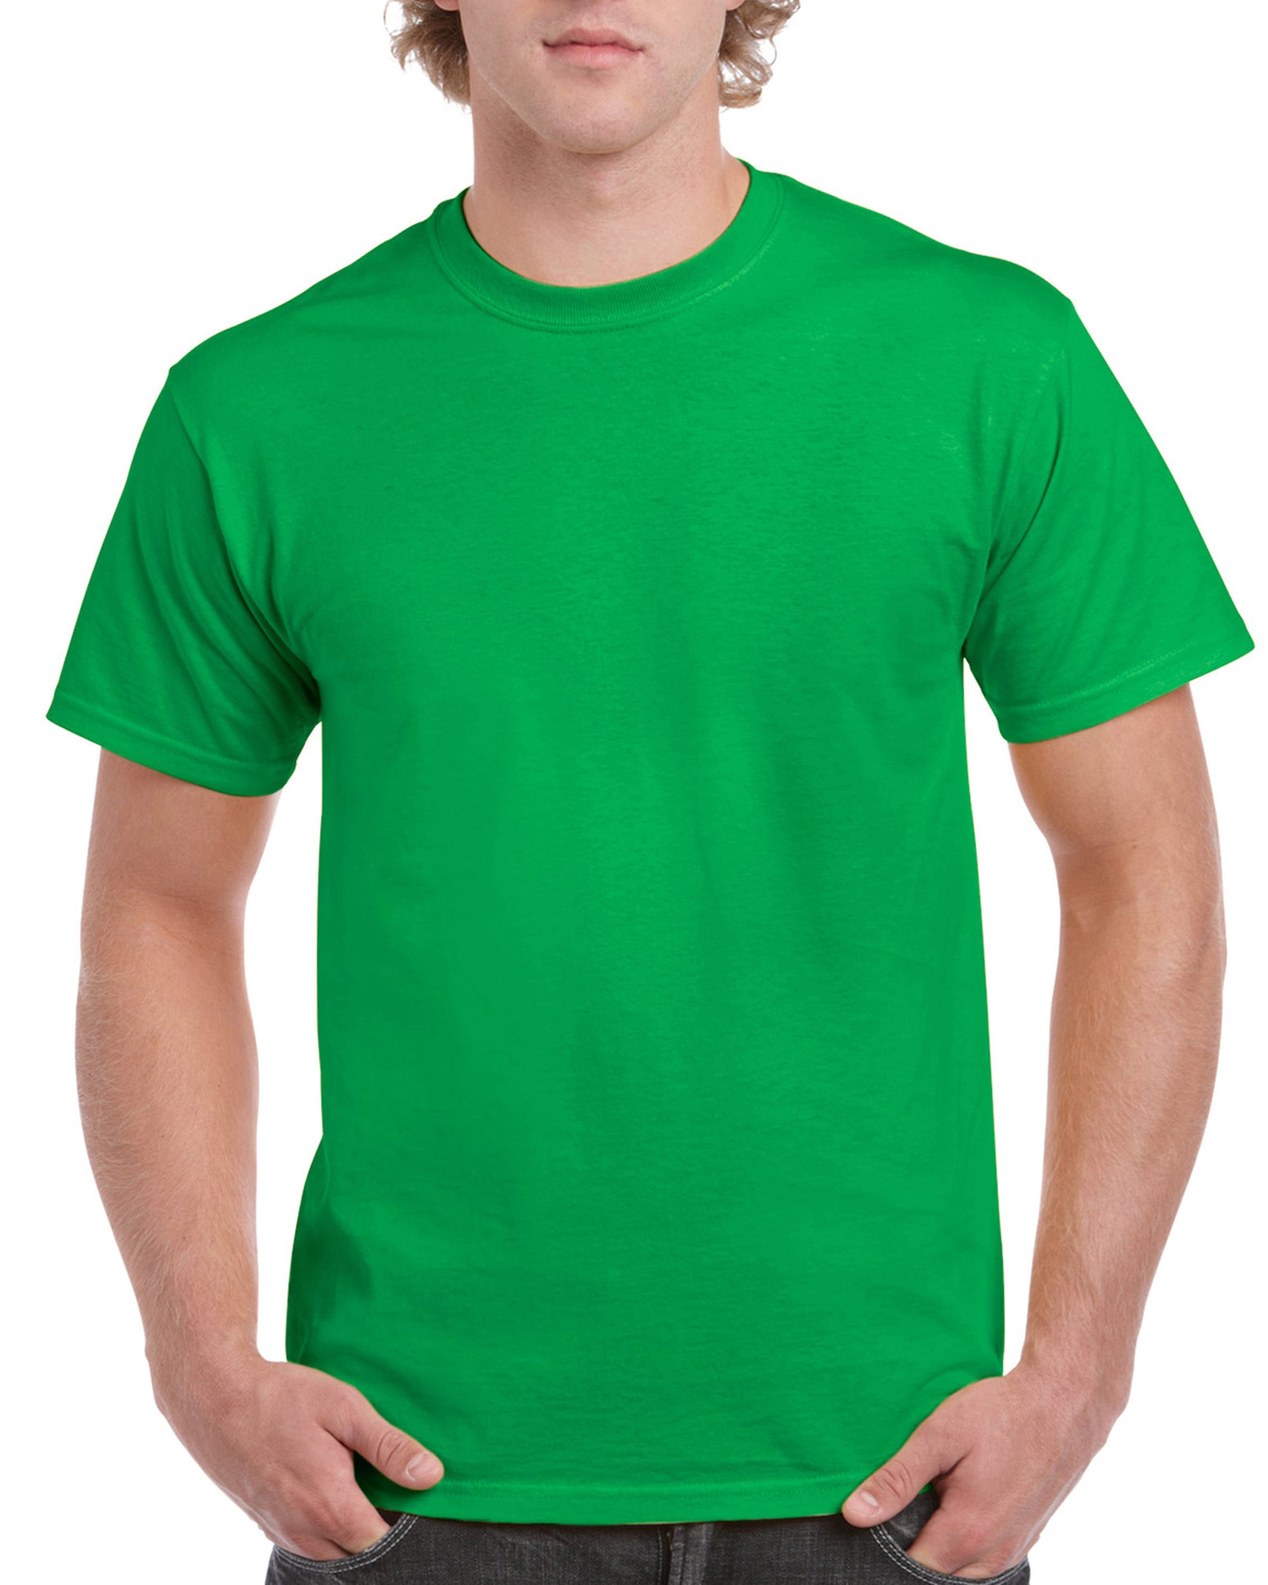 AMERICAN PLAIN IRISH GREEN T-SHIRT- MEMORABLE GIFT OF TOP QUALITY-LOWEST PRICE GAURANTEED-DO NOT MISS THIS CHANCE-FREE HOME(POST OFFICE) DELIVERY-ART. NO. 5000-REA 28%?